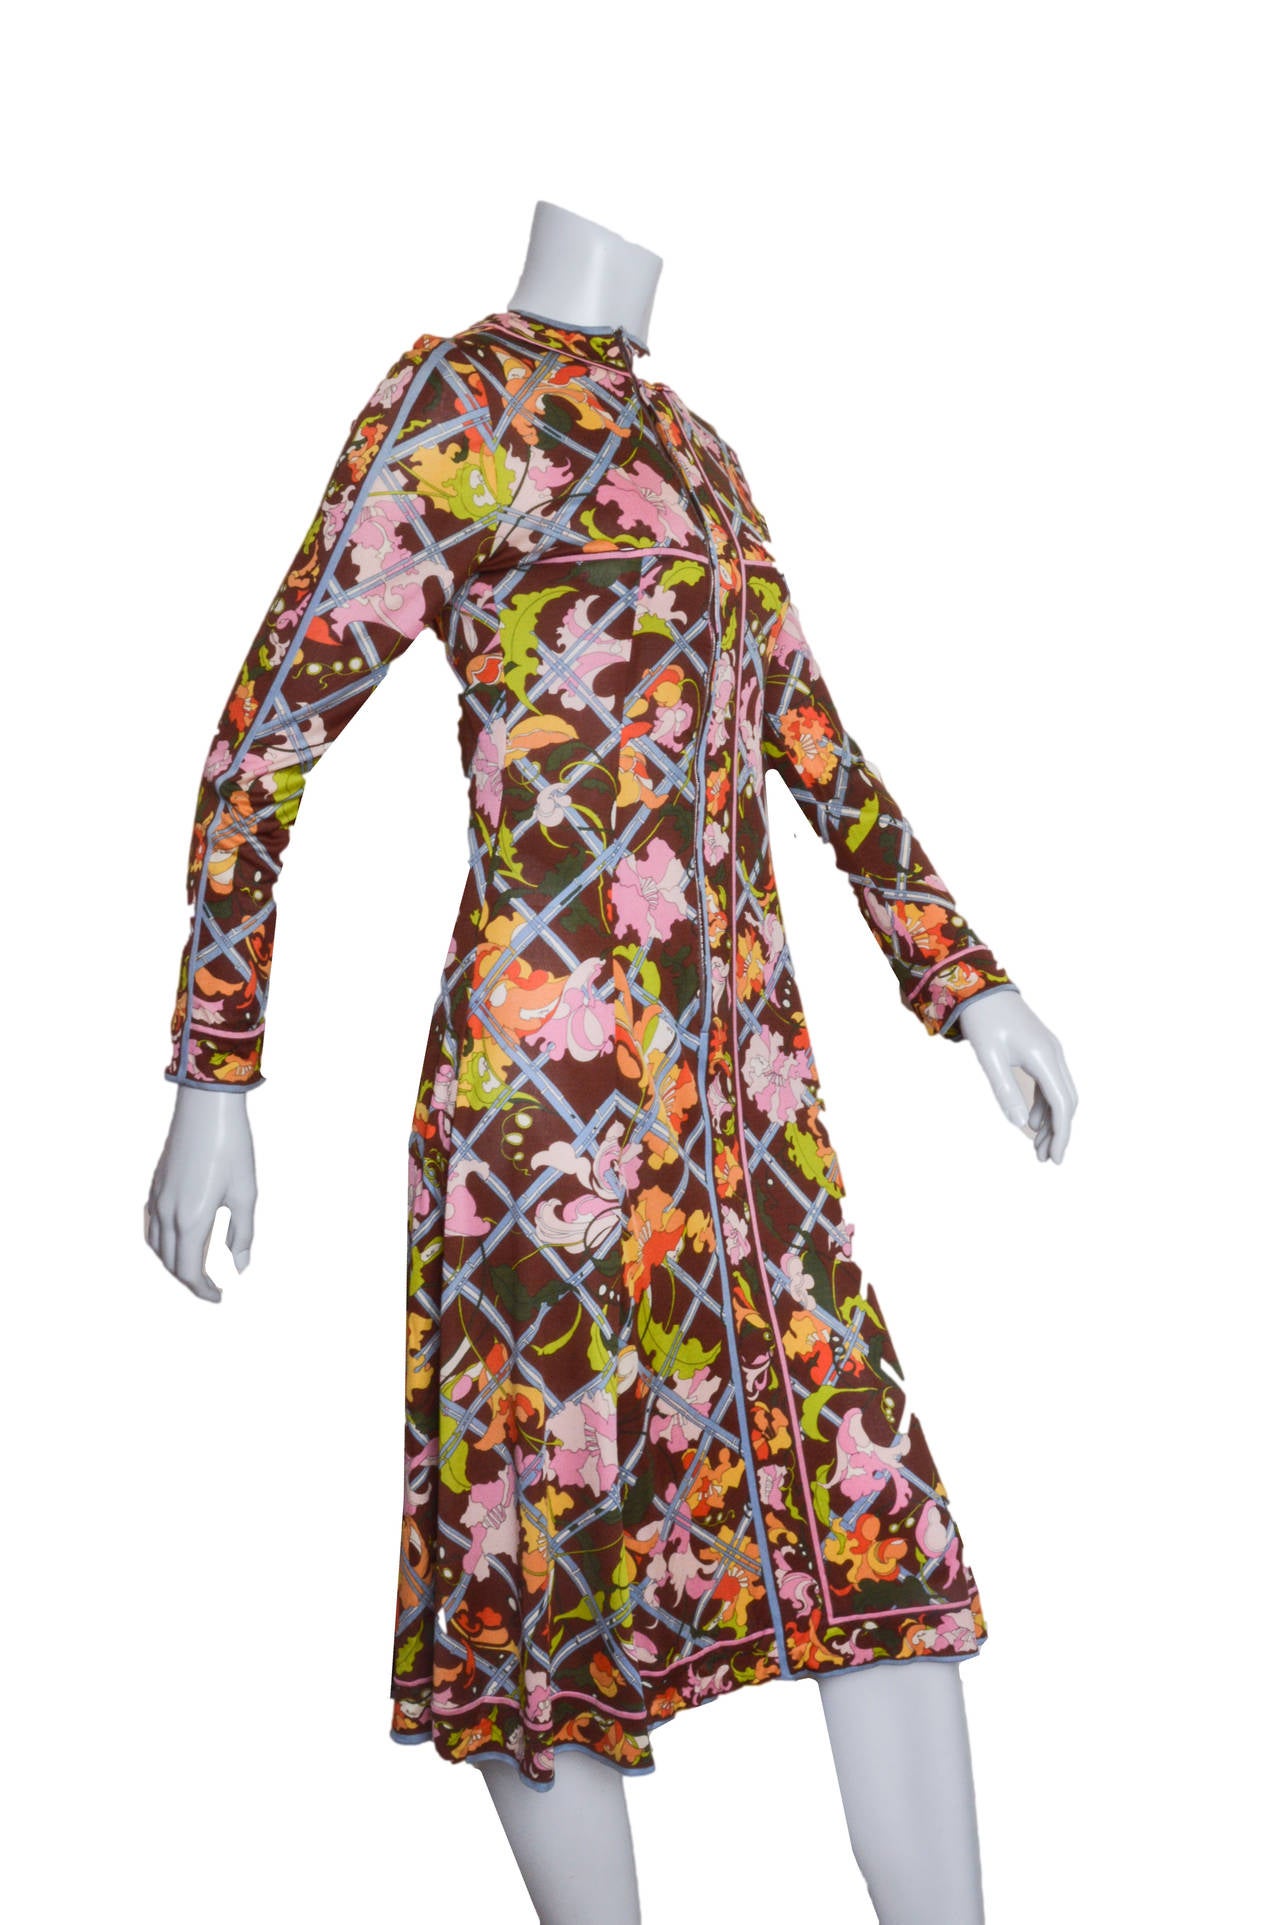 Gorgeous vintage Emilio Pucci autumnal print dress.
Flowers weaving in and out of a trellis.
Silk jersey in deep brown with pink, pale blue, oranges and yellows.
High neck. 
Fitted through the waist then flares into an a-line skirt.
Back